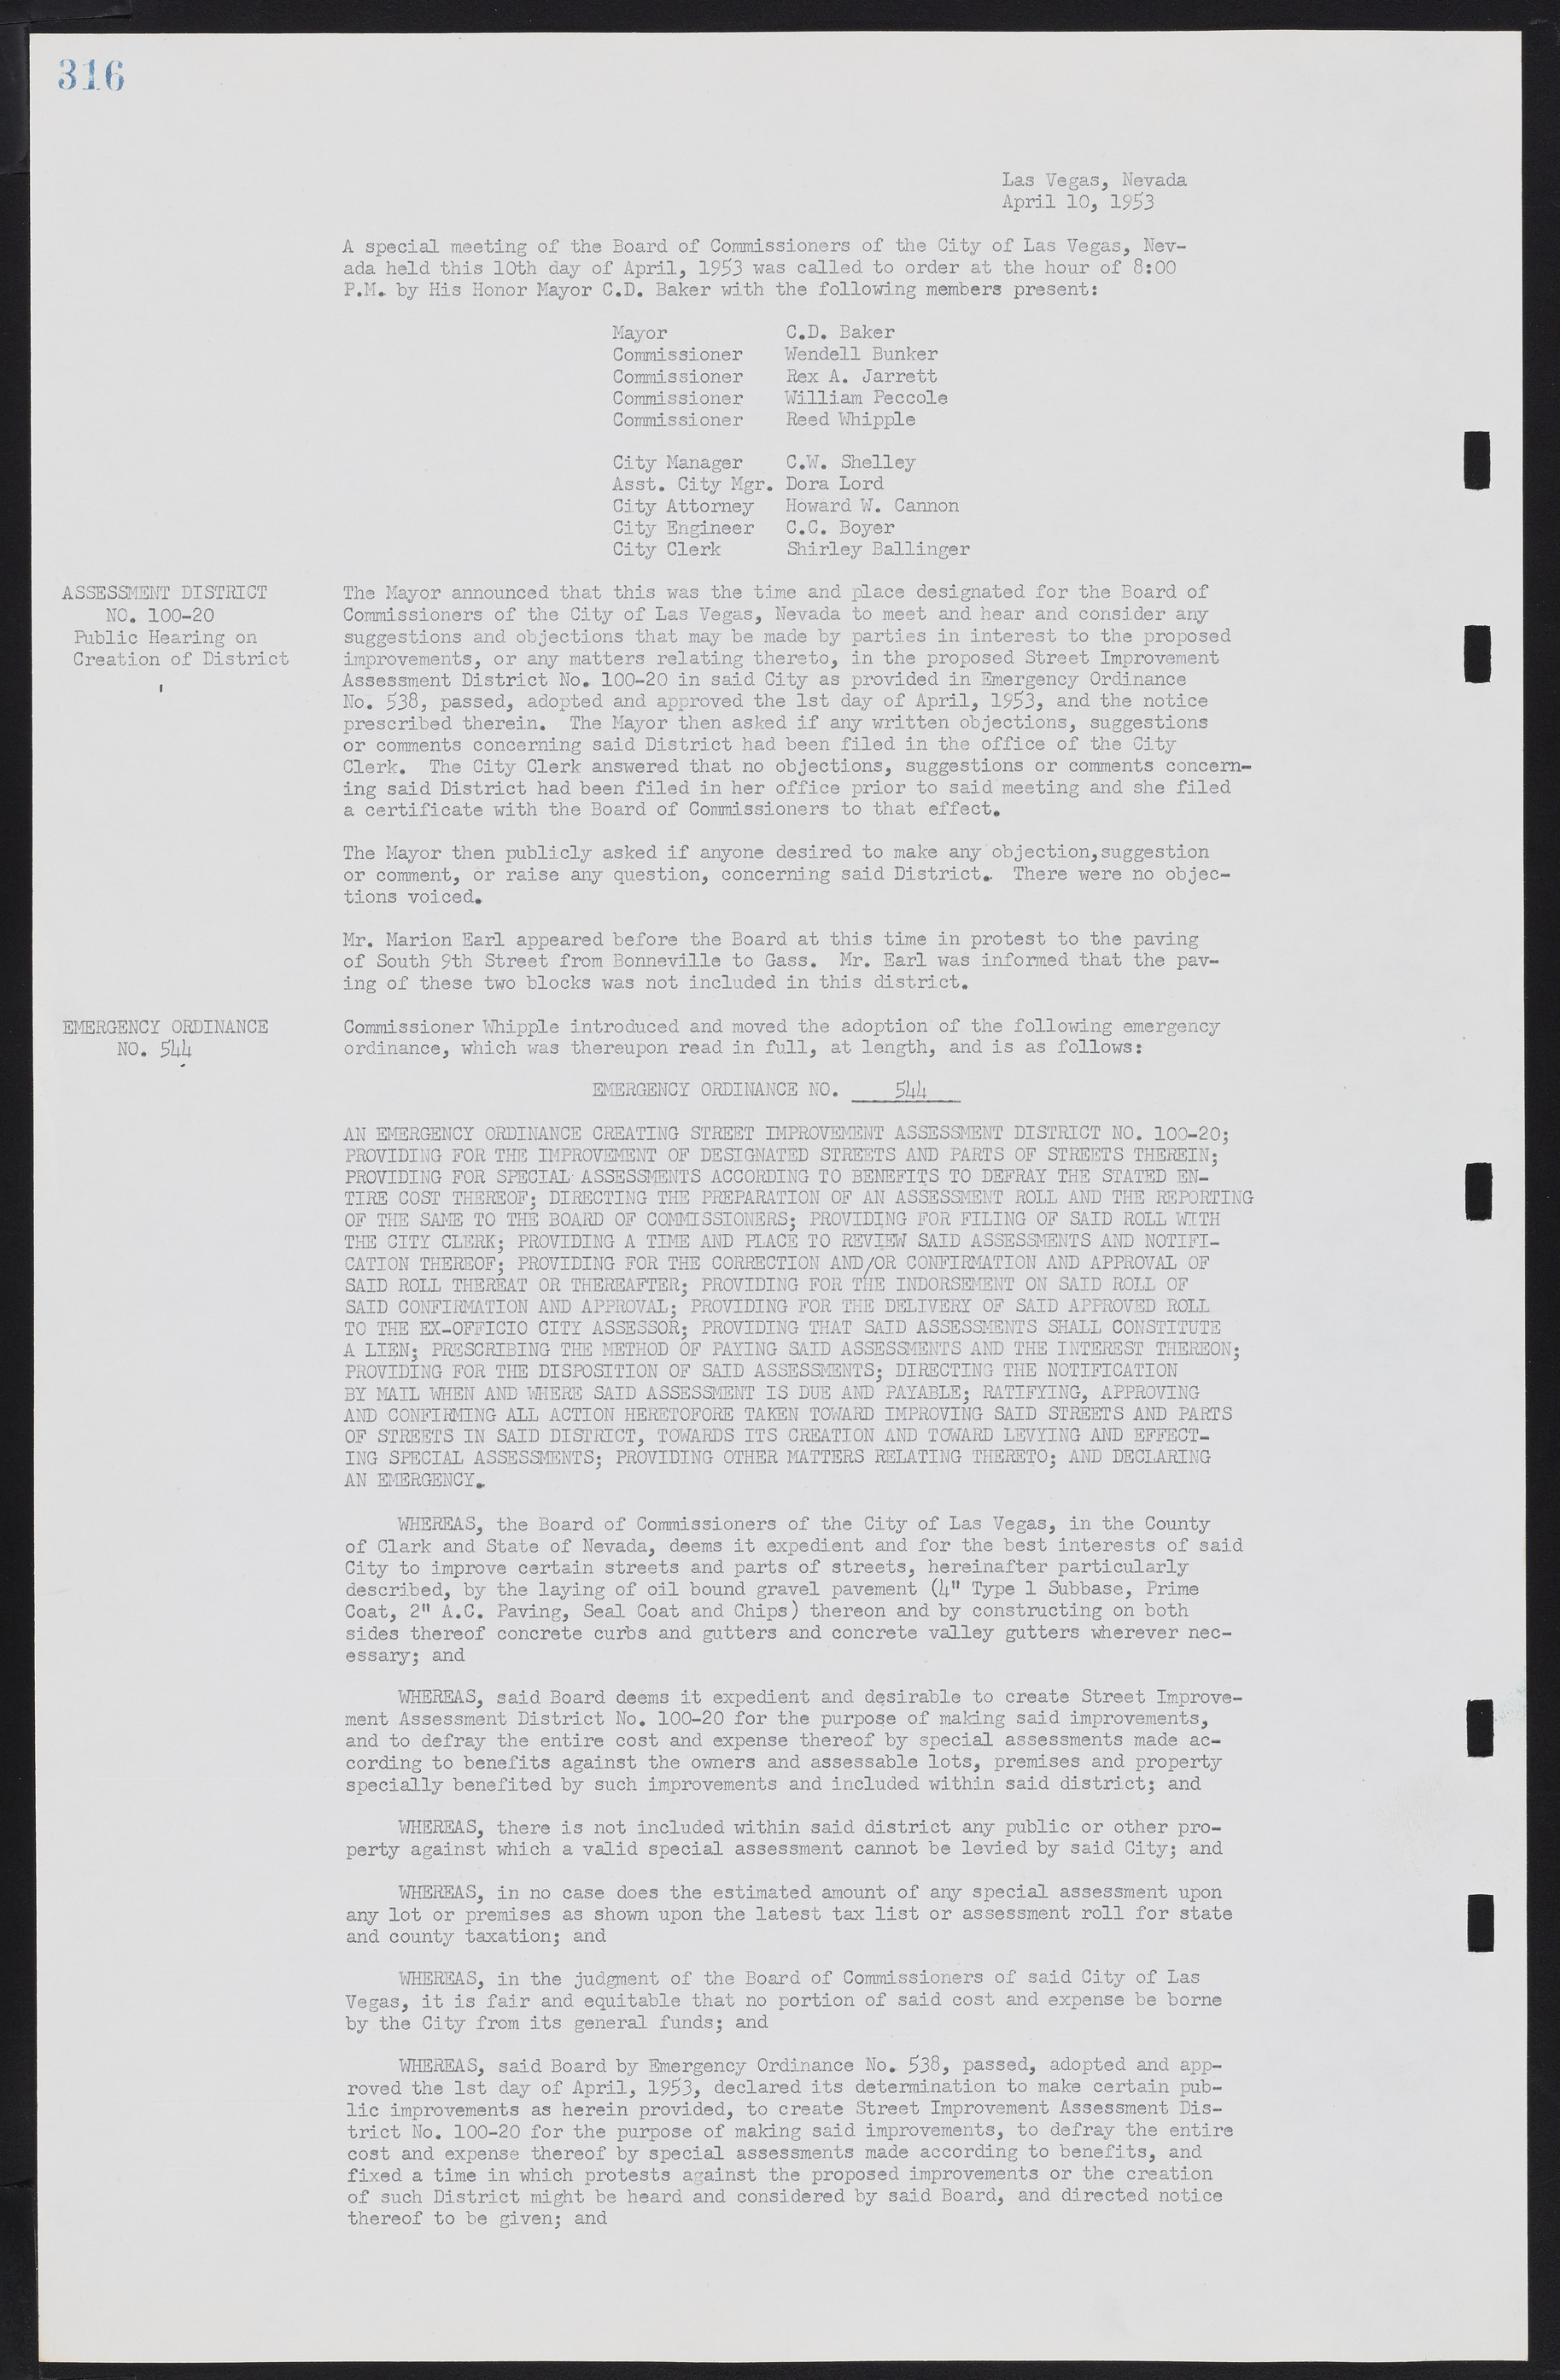 Las Vegas City Commission Minutes, May 26, 1952 to February 17, 1954, lvc000008-344